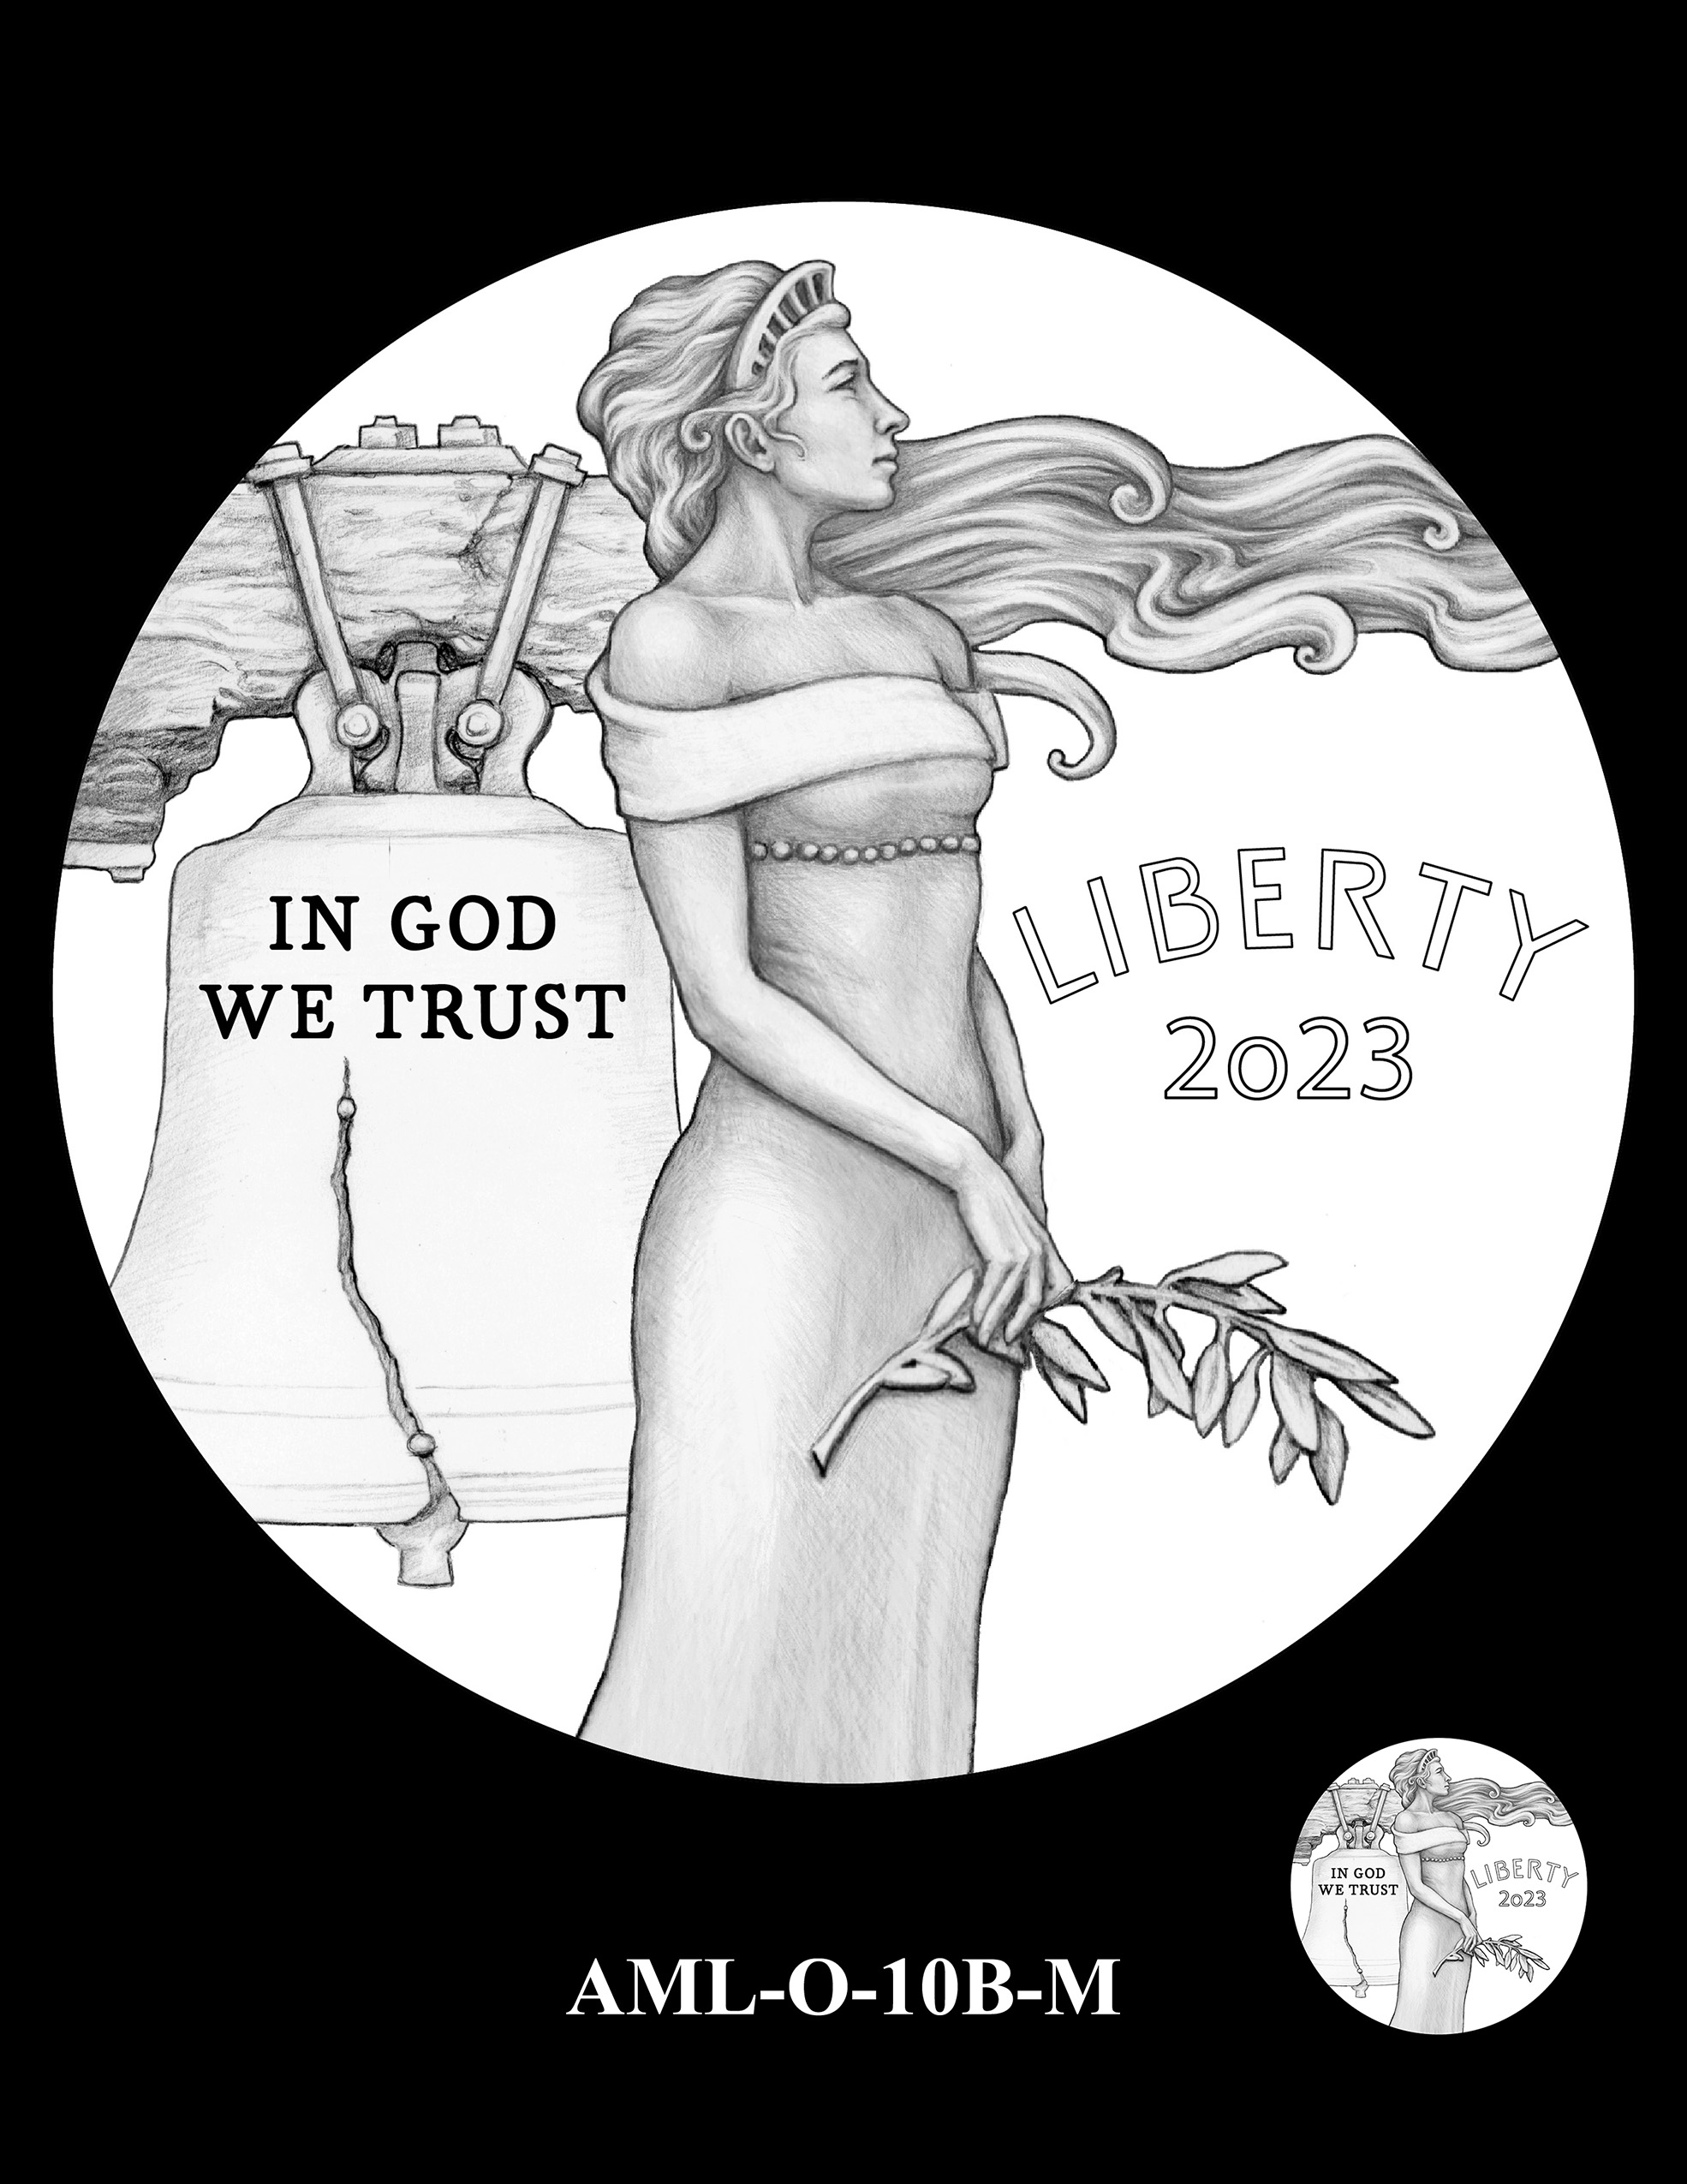 AML-O-10B-M -- 2023 American Liberty High Relief 24k Gold and Silver Medal Program